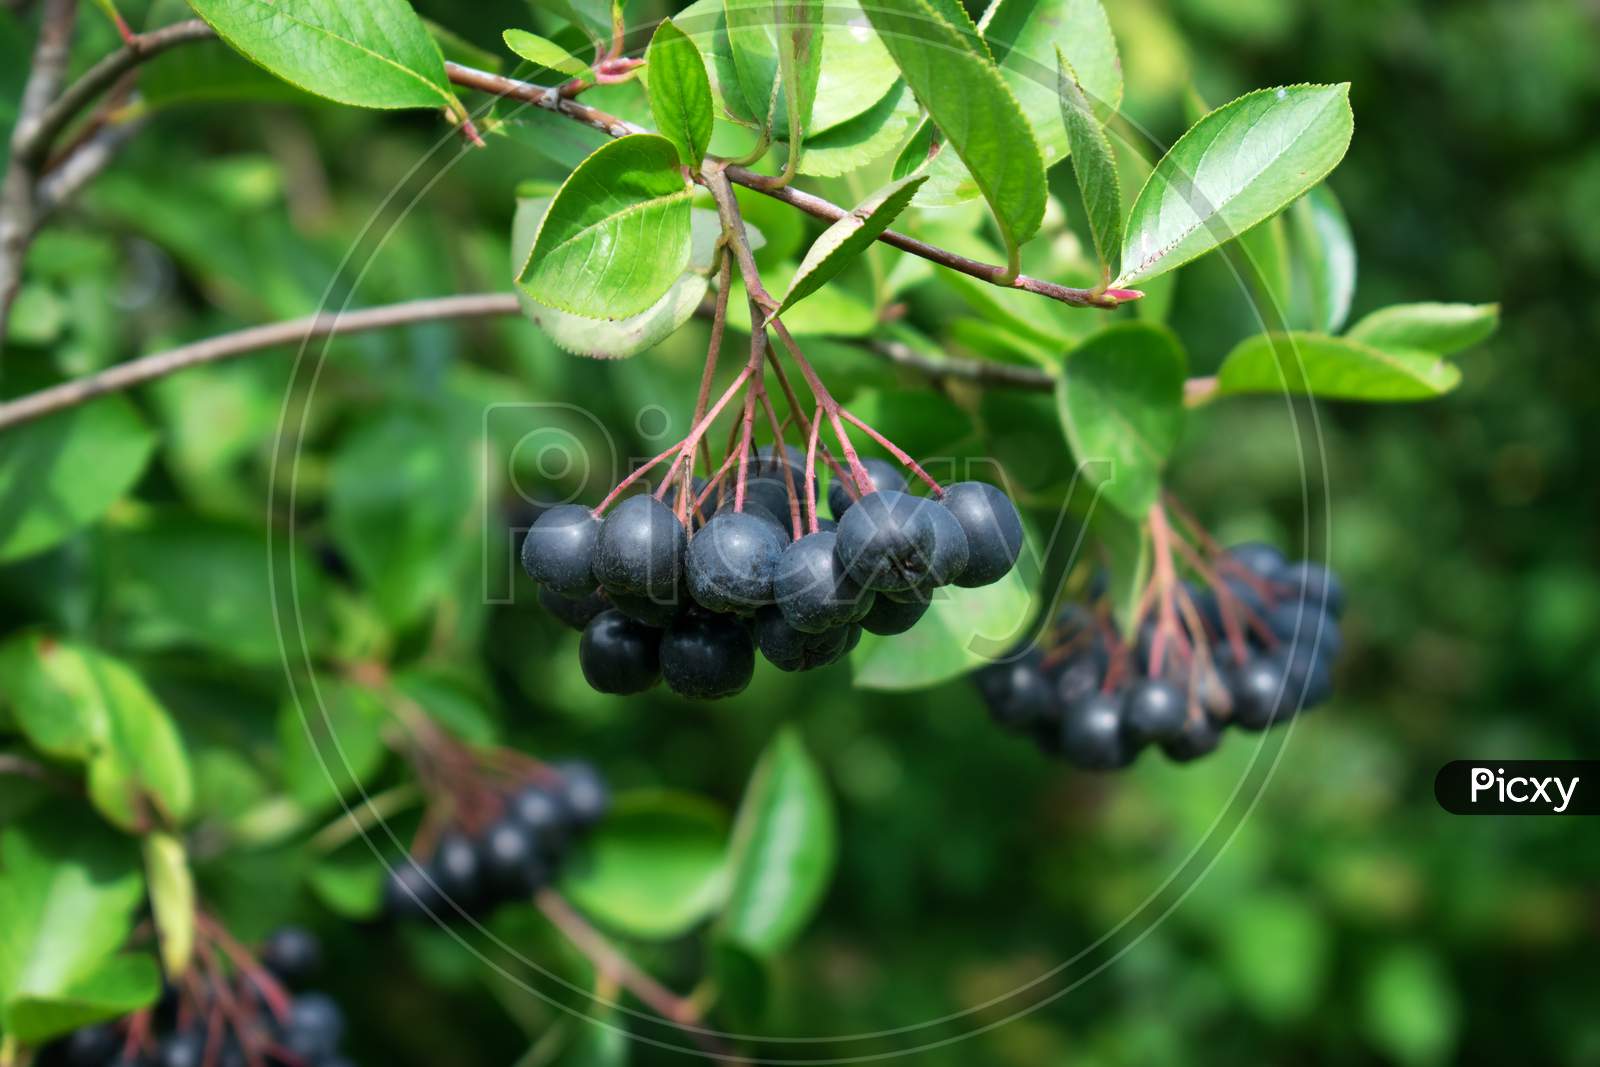 Branch Filled With Aronia Berries.